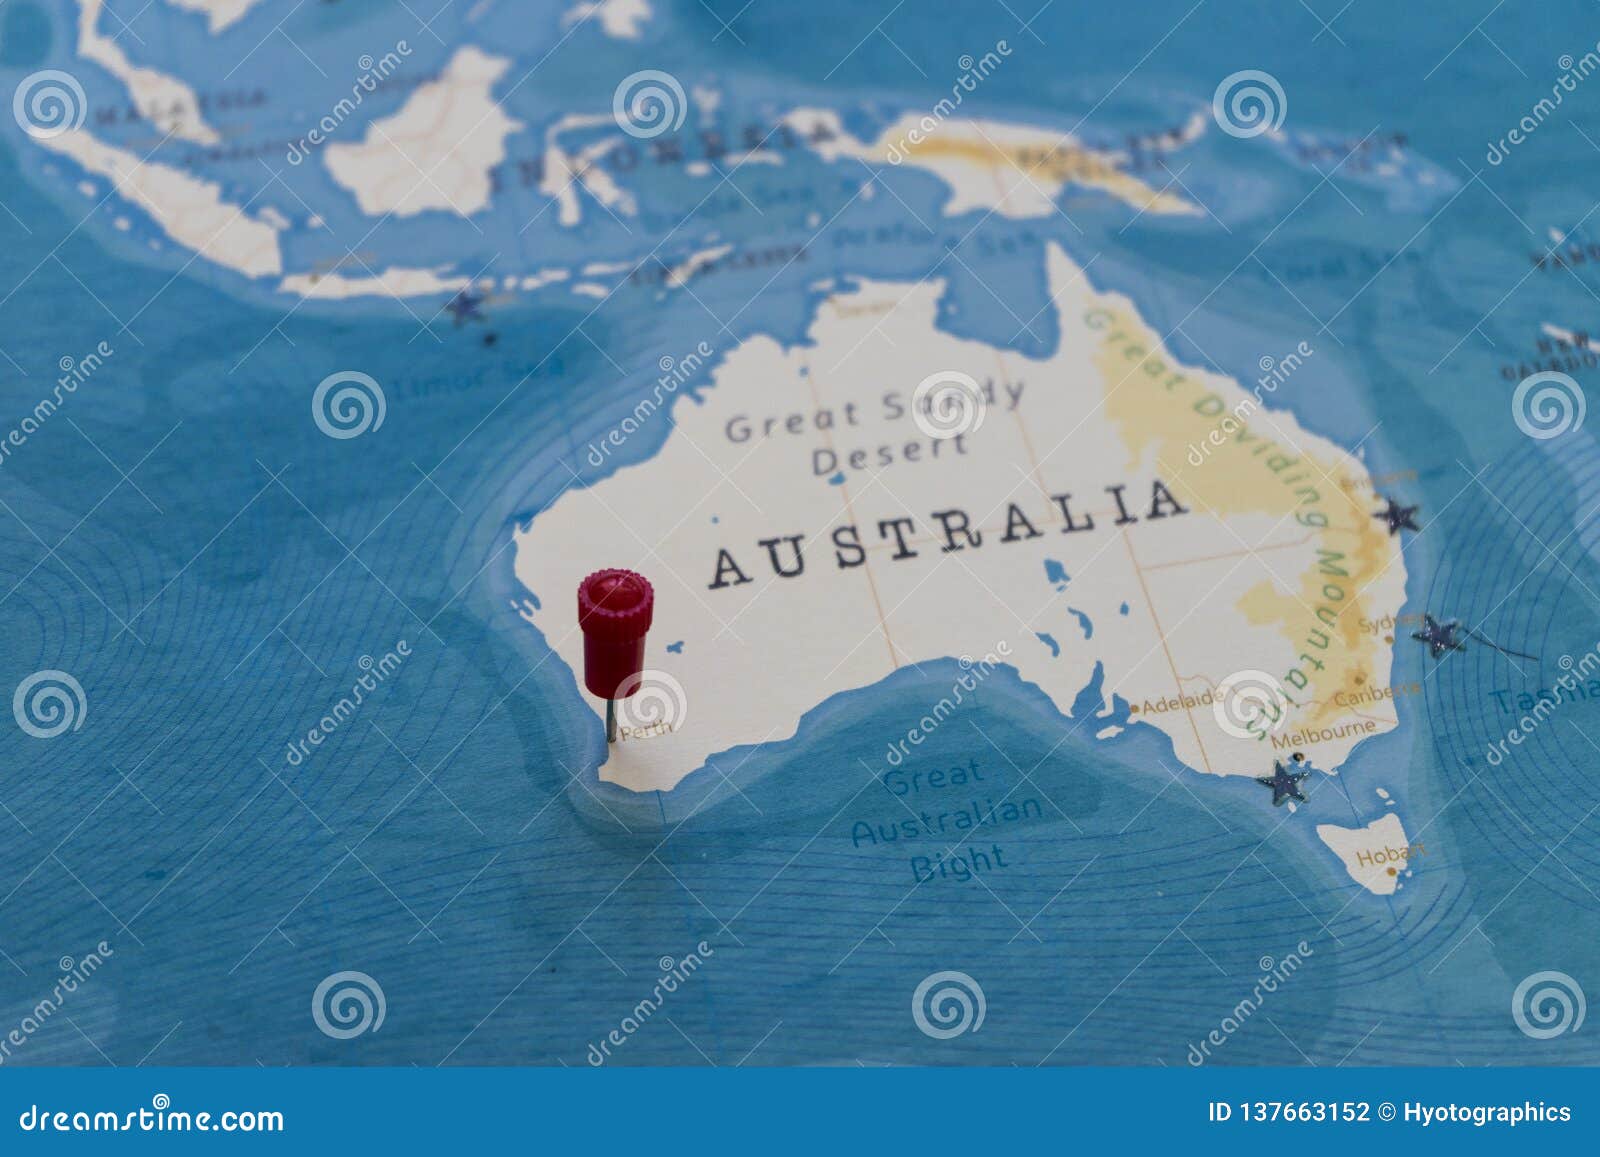 carte australie perth A Pin On Perth Australia In The World Map Stock Photo Image Of Advertise Holiday 137663152 carte australie perth